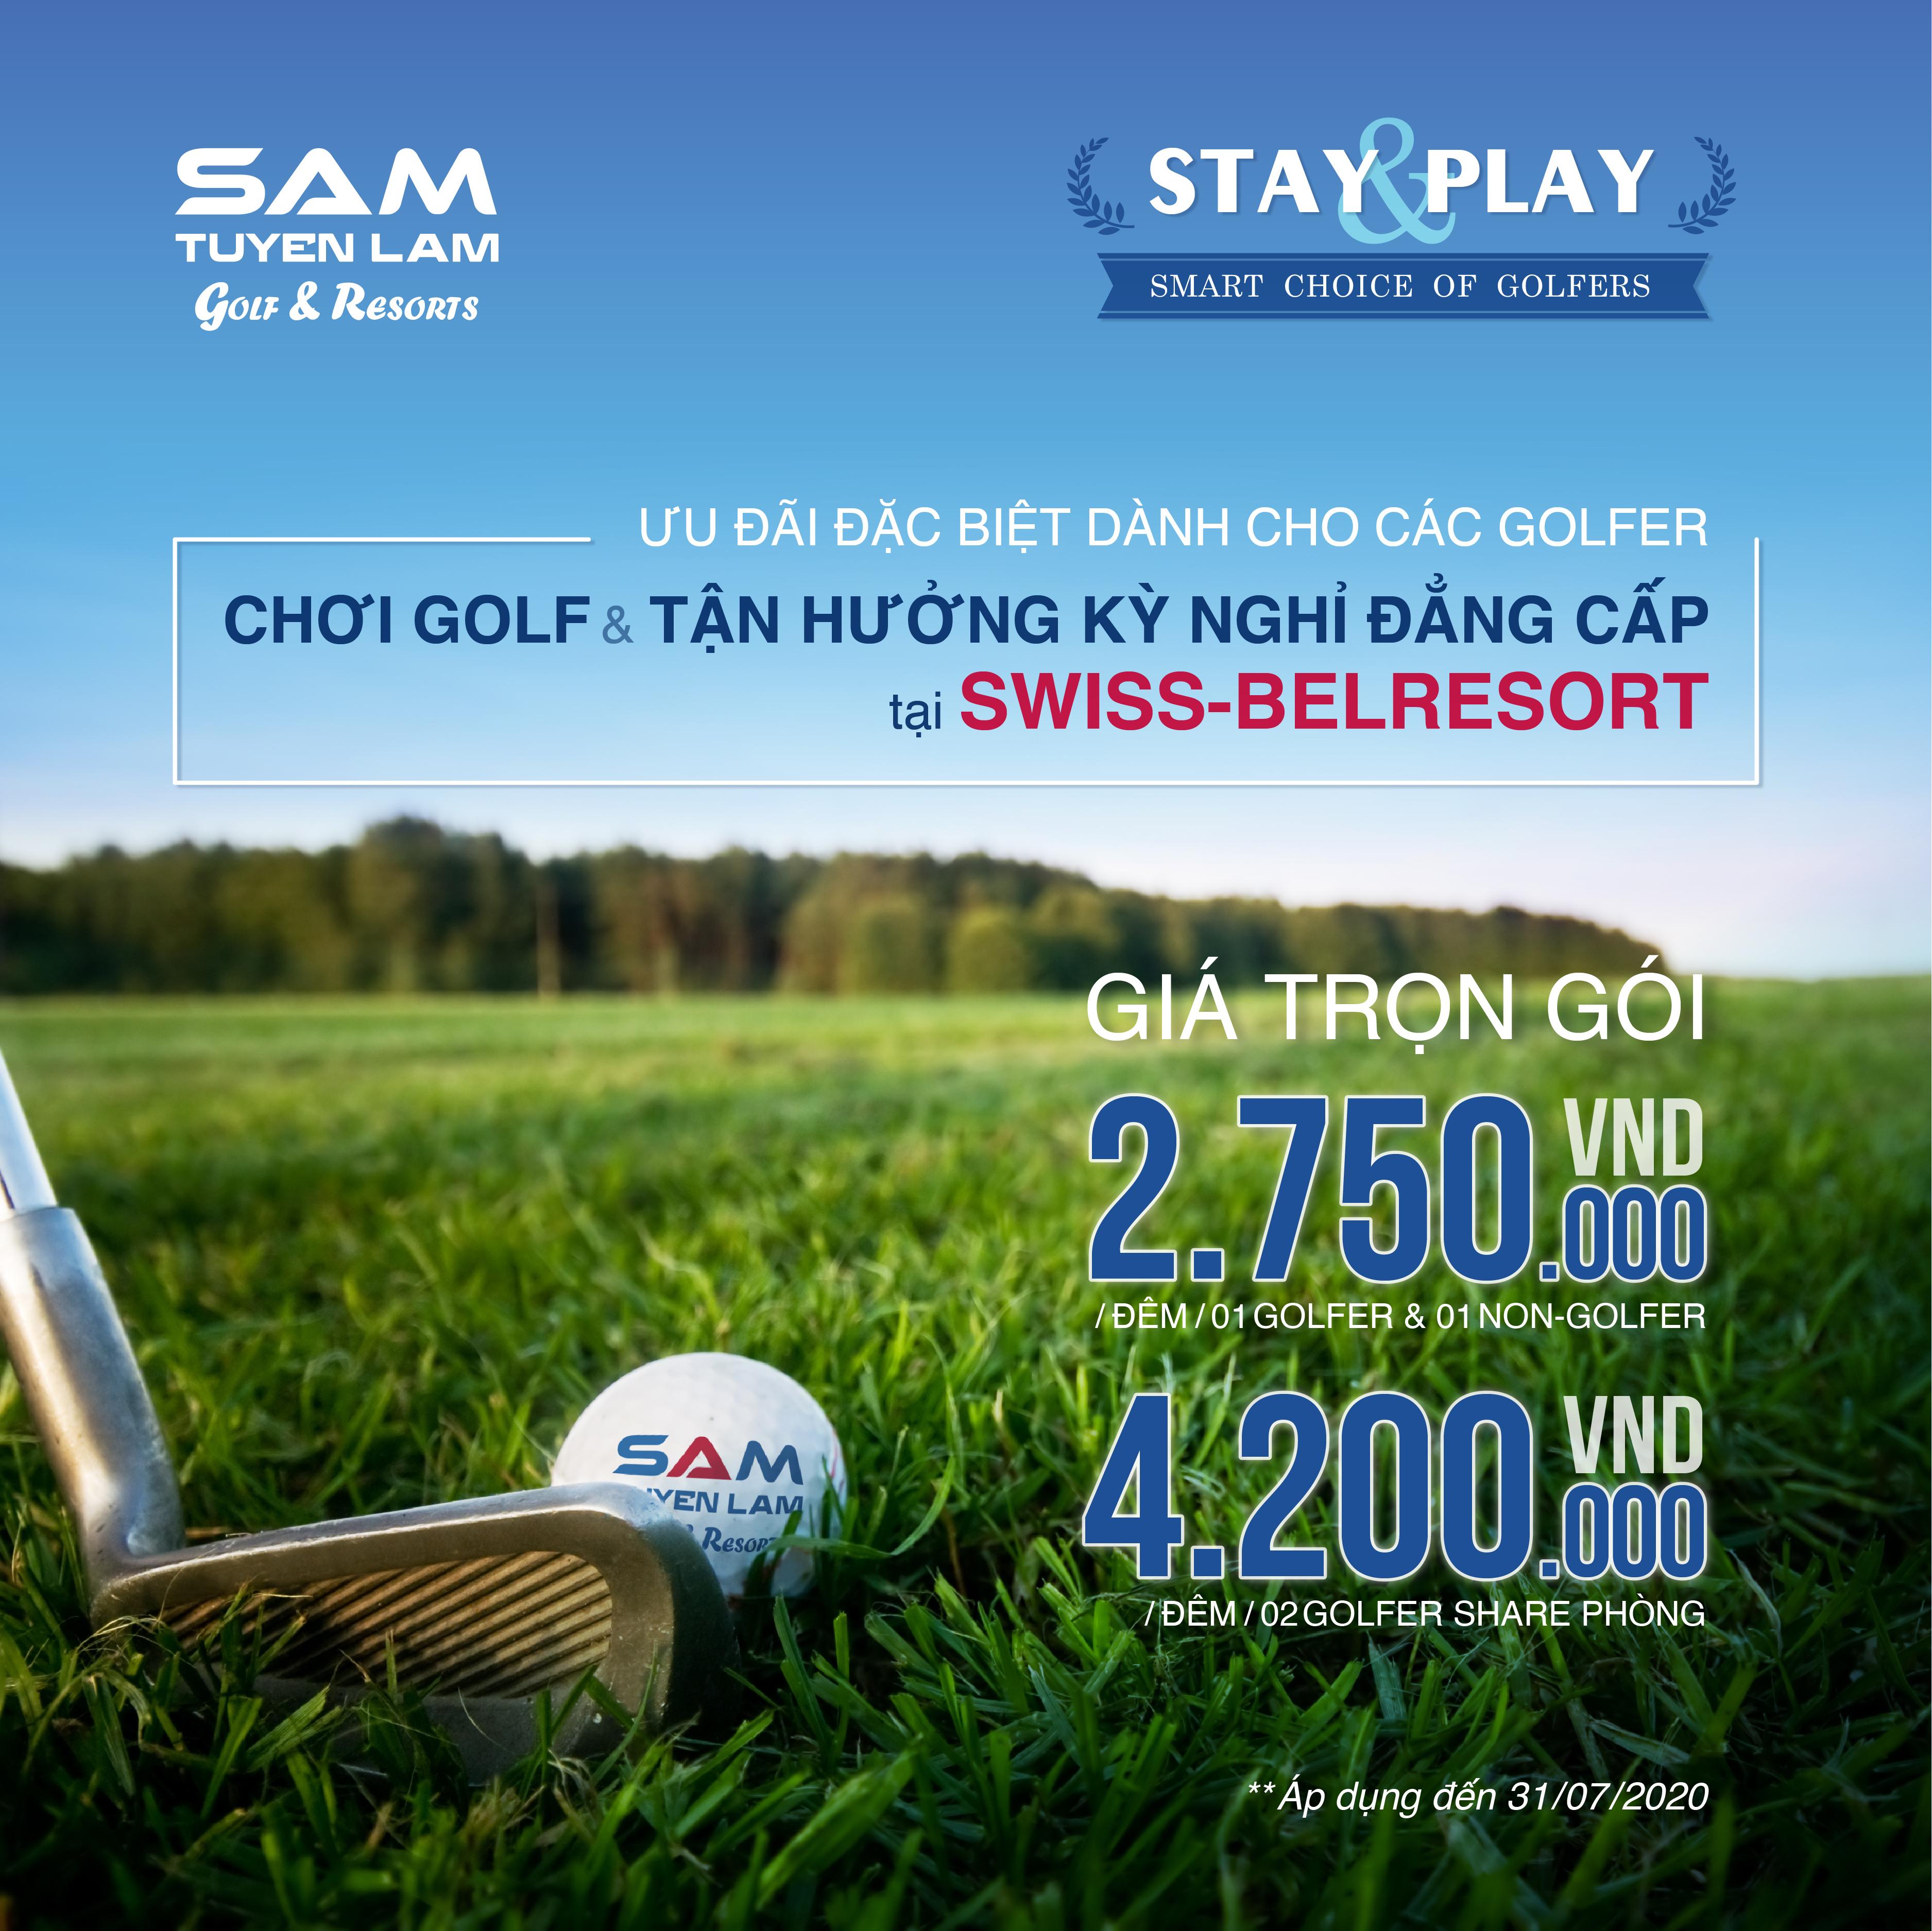 (Tiếng Việt) Stay & Play